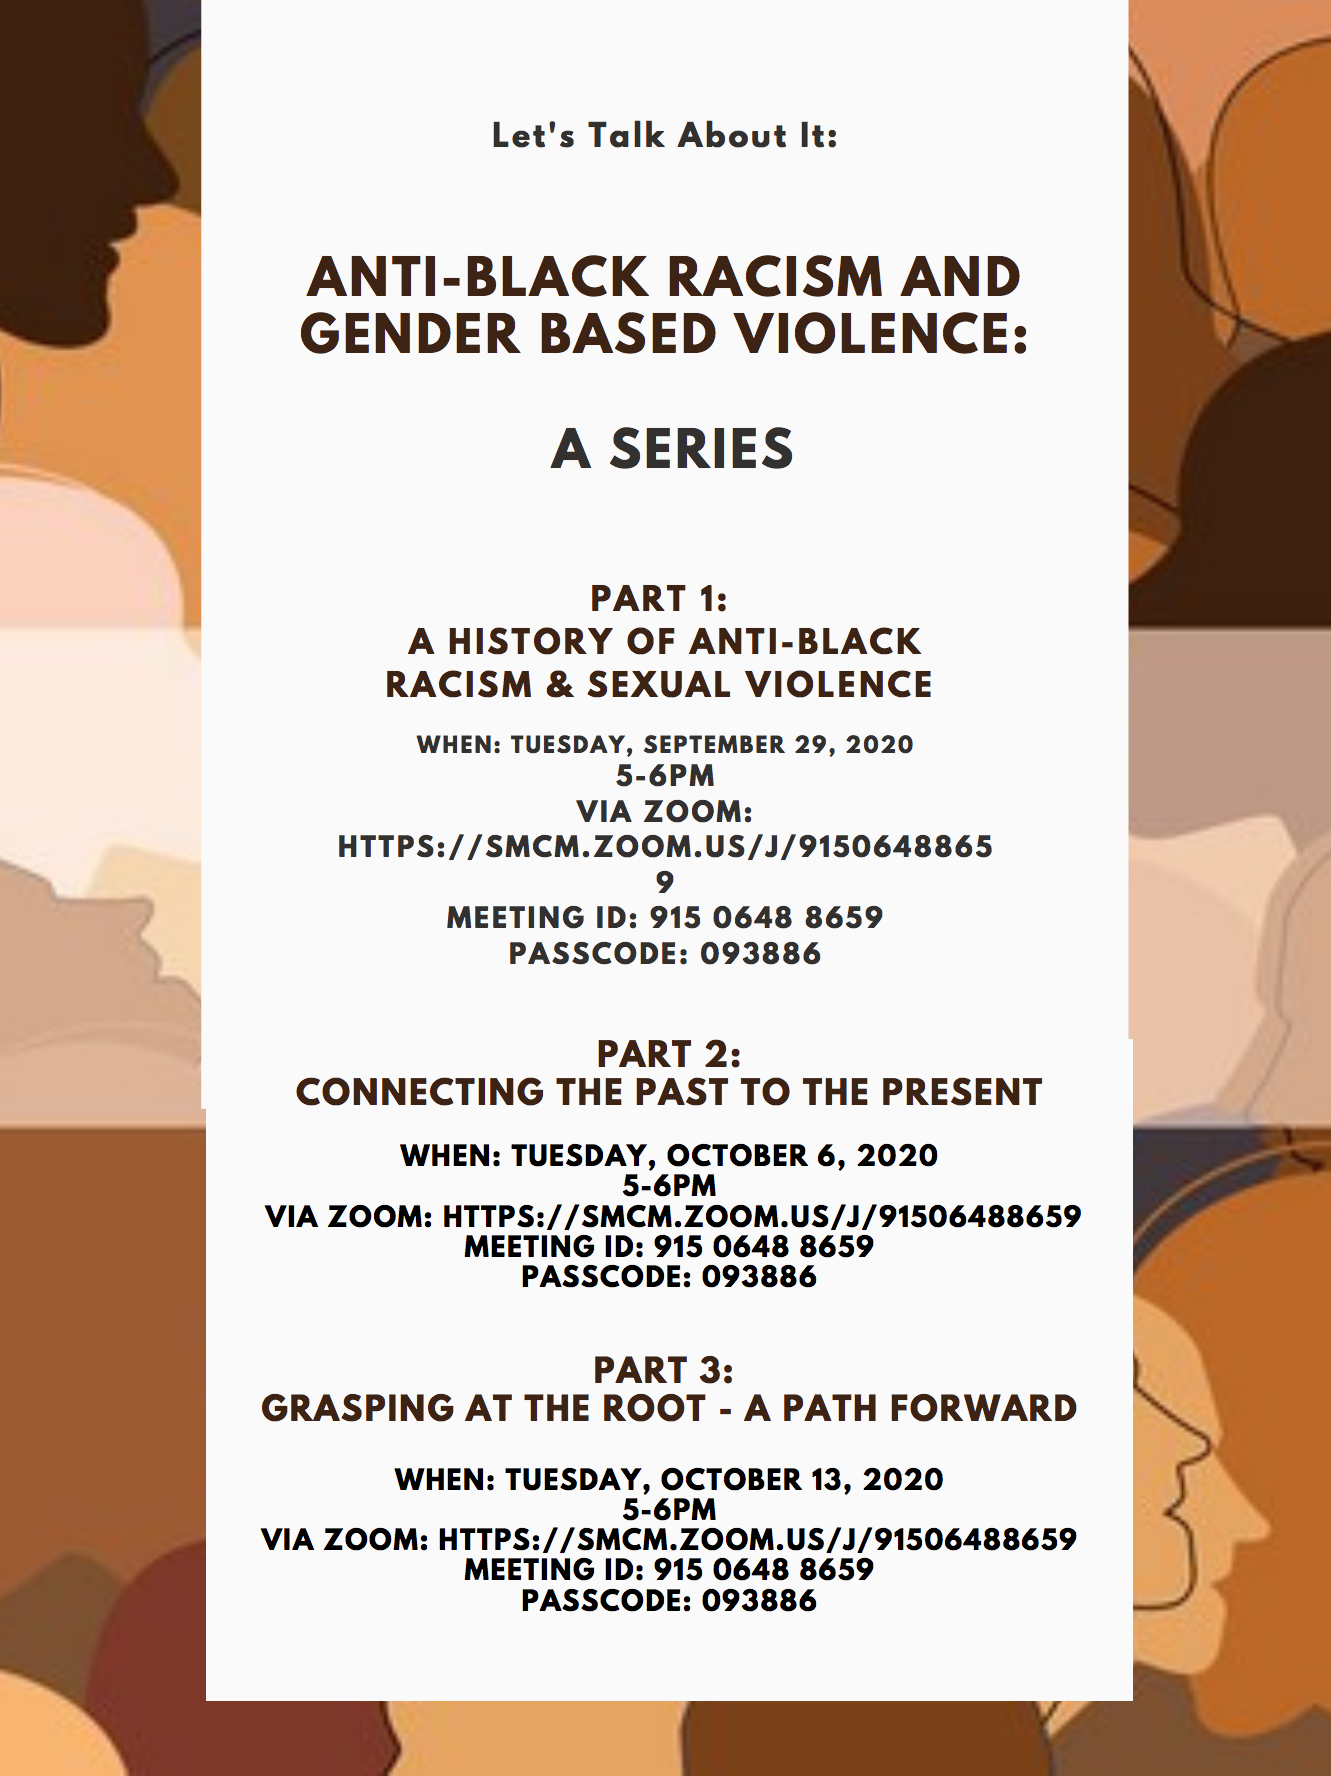 Advertisement of Anti-Black Racism and Gender-Based Violence event series. Includes dates and zoom information that is repeated in the full announcement.